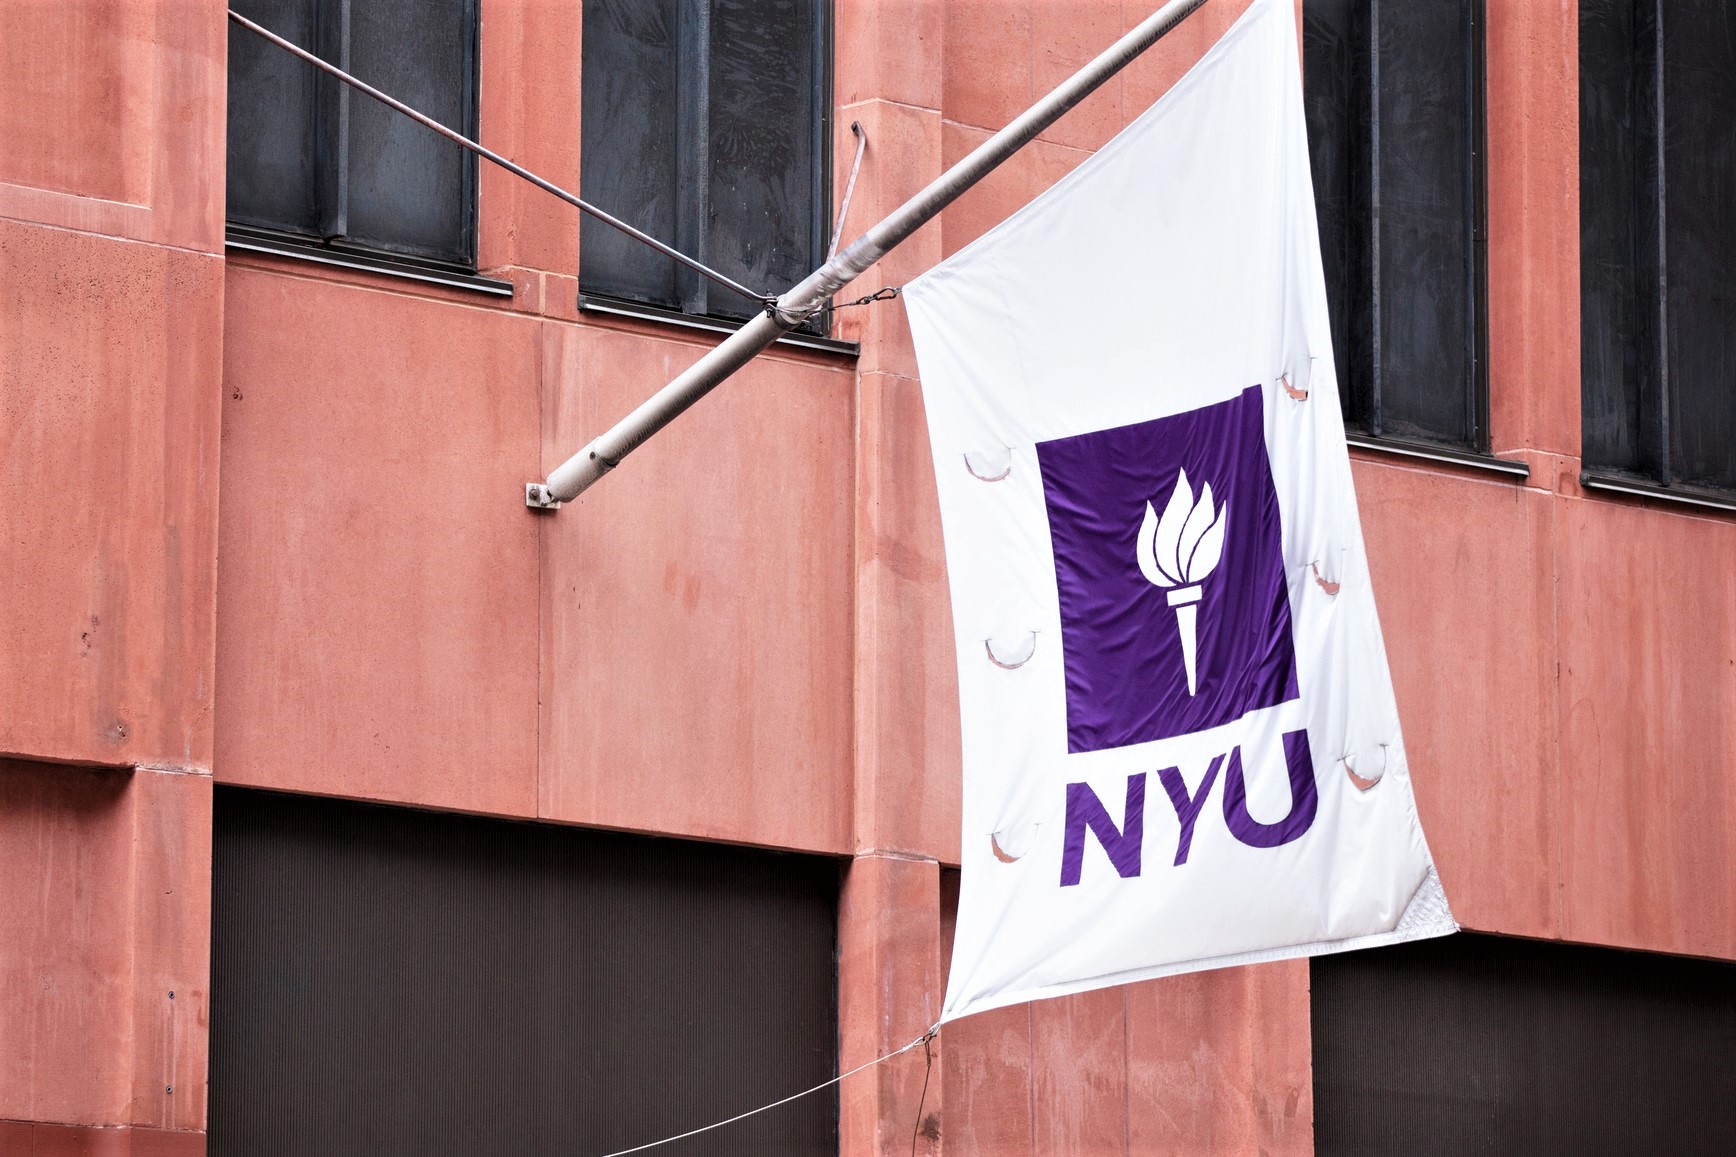 Want to Major in Blockchain Tech? Go to NYU